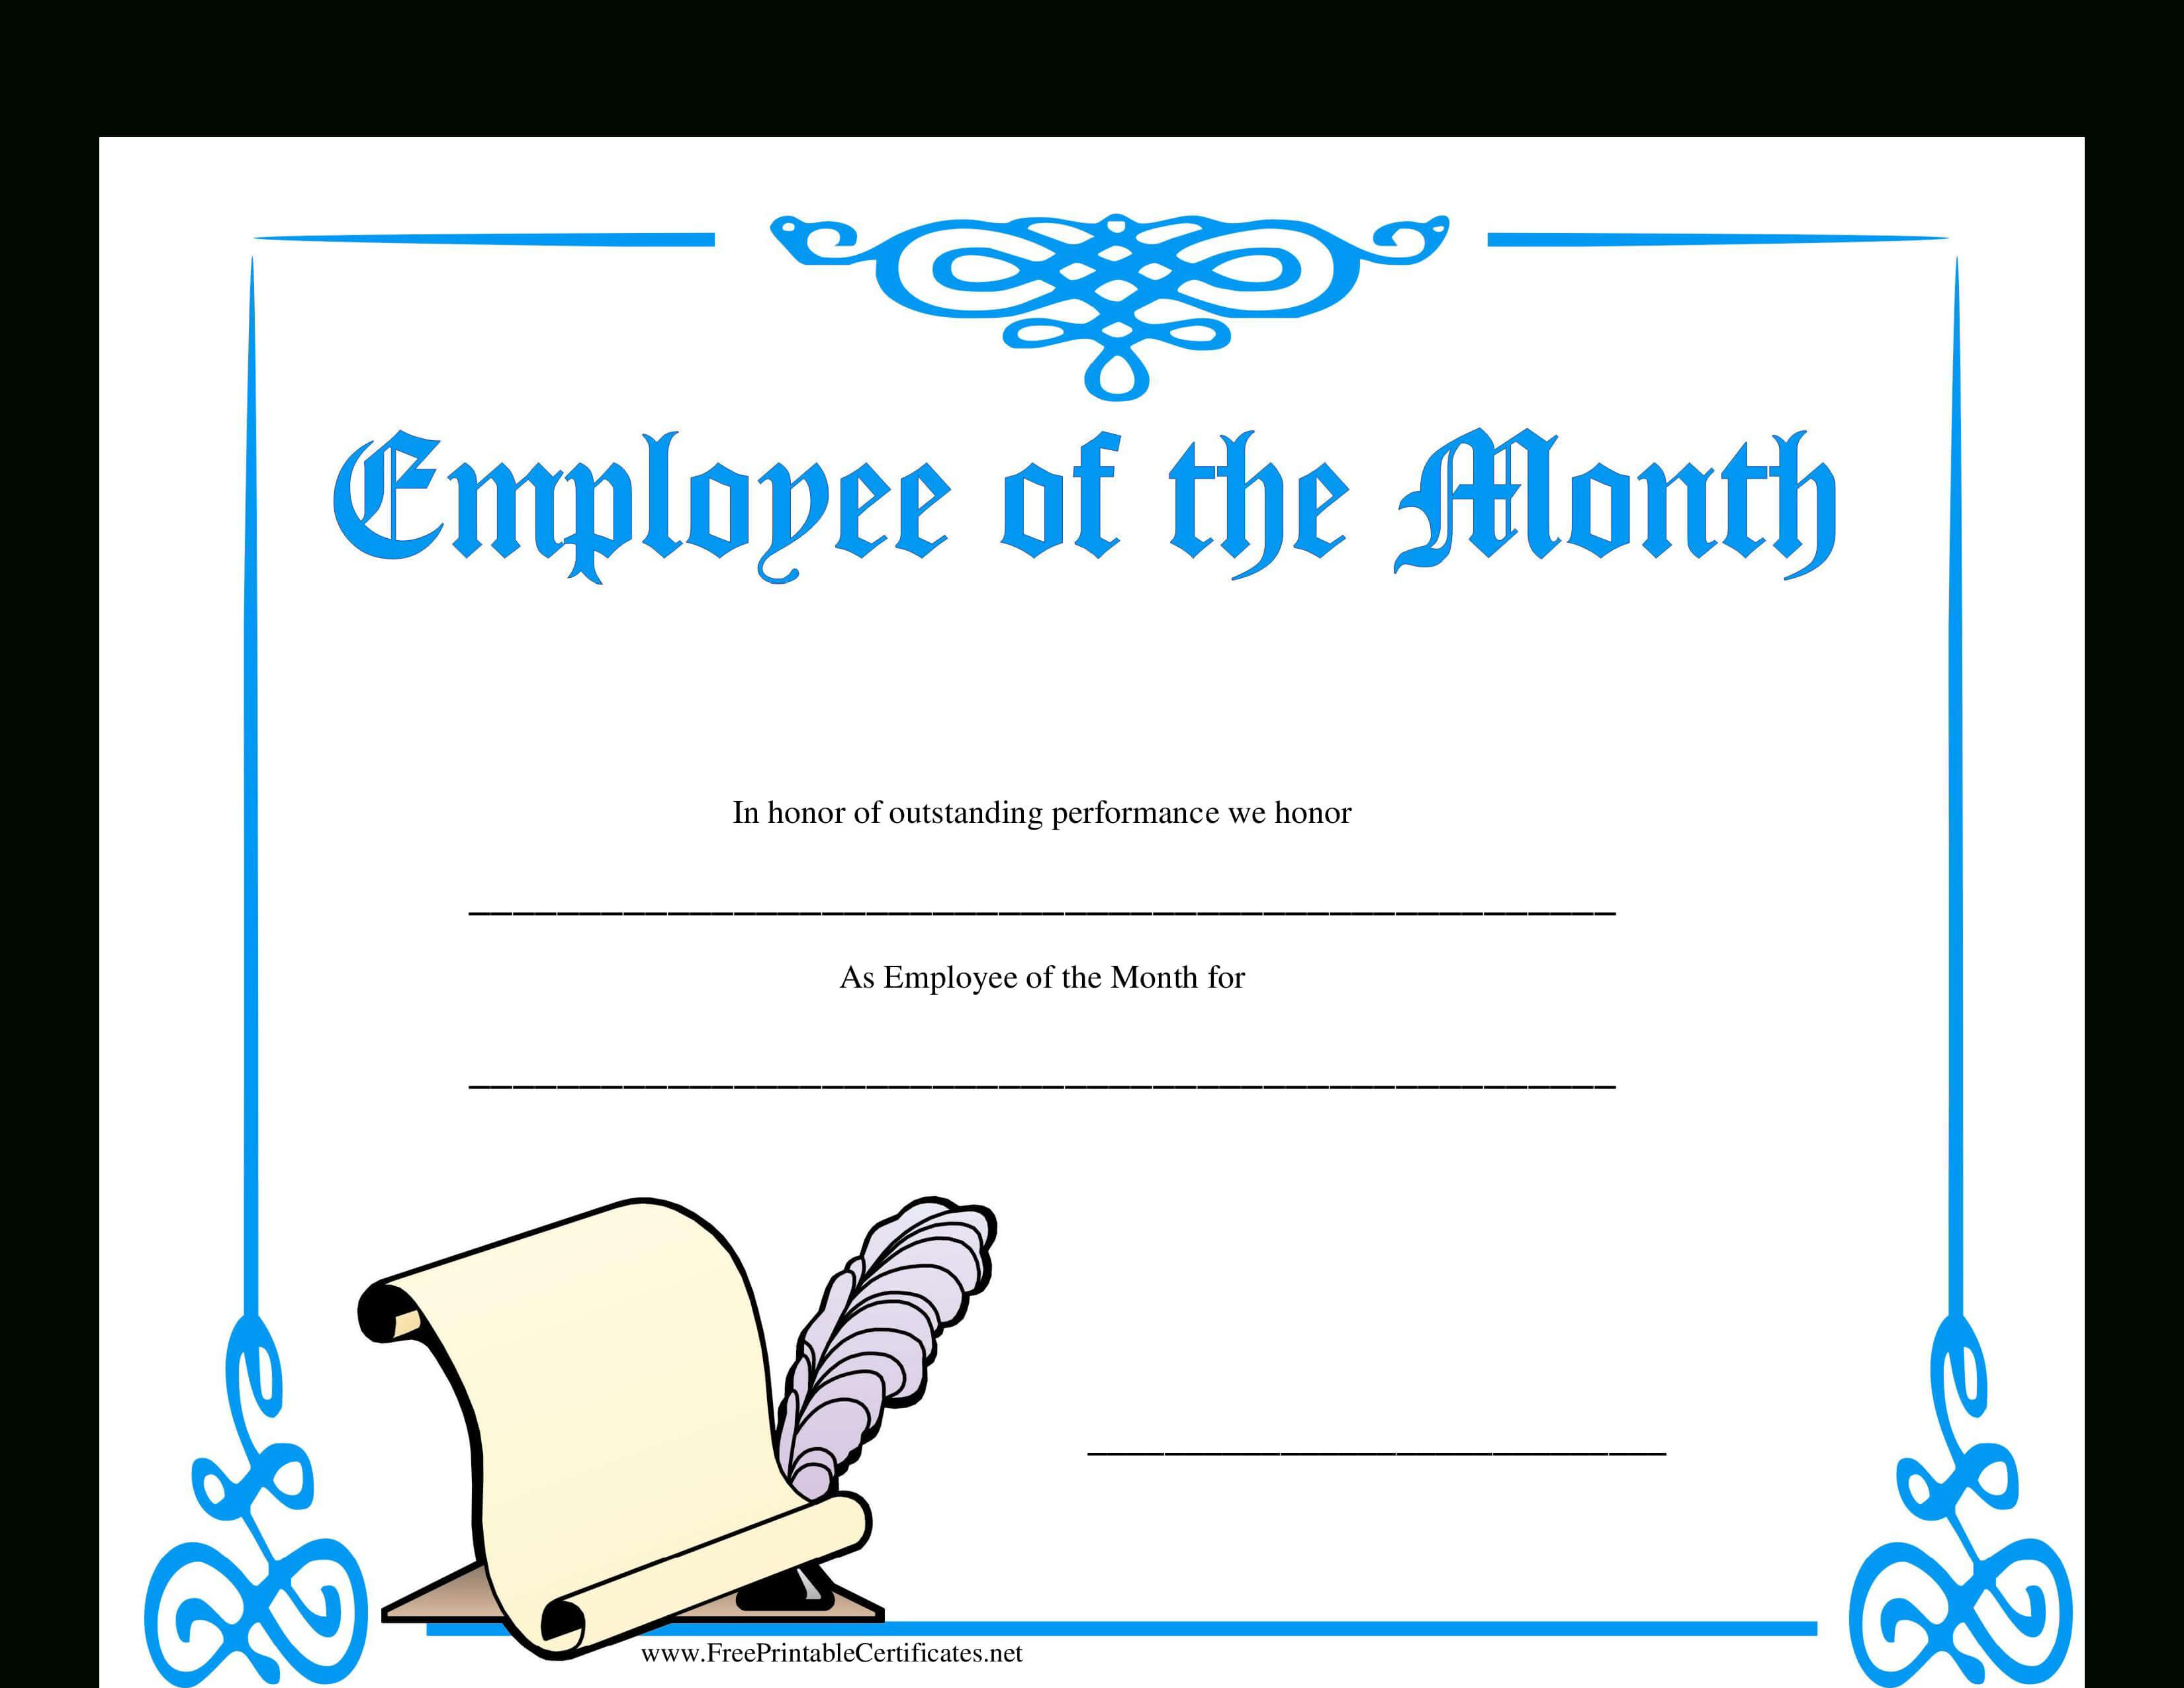 Employee Of The Month Certificate | Templates At For Employee Of The Month Certificate Templates